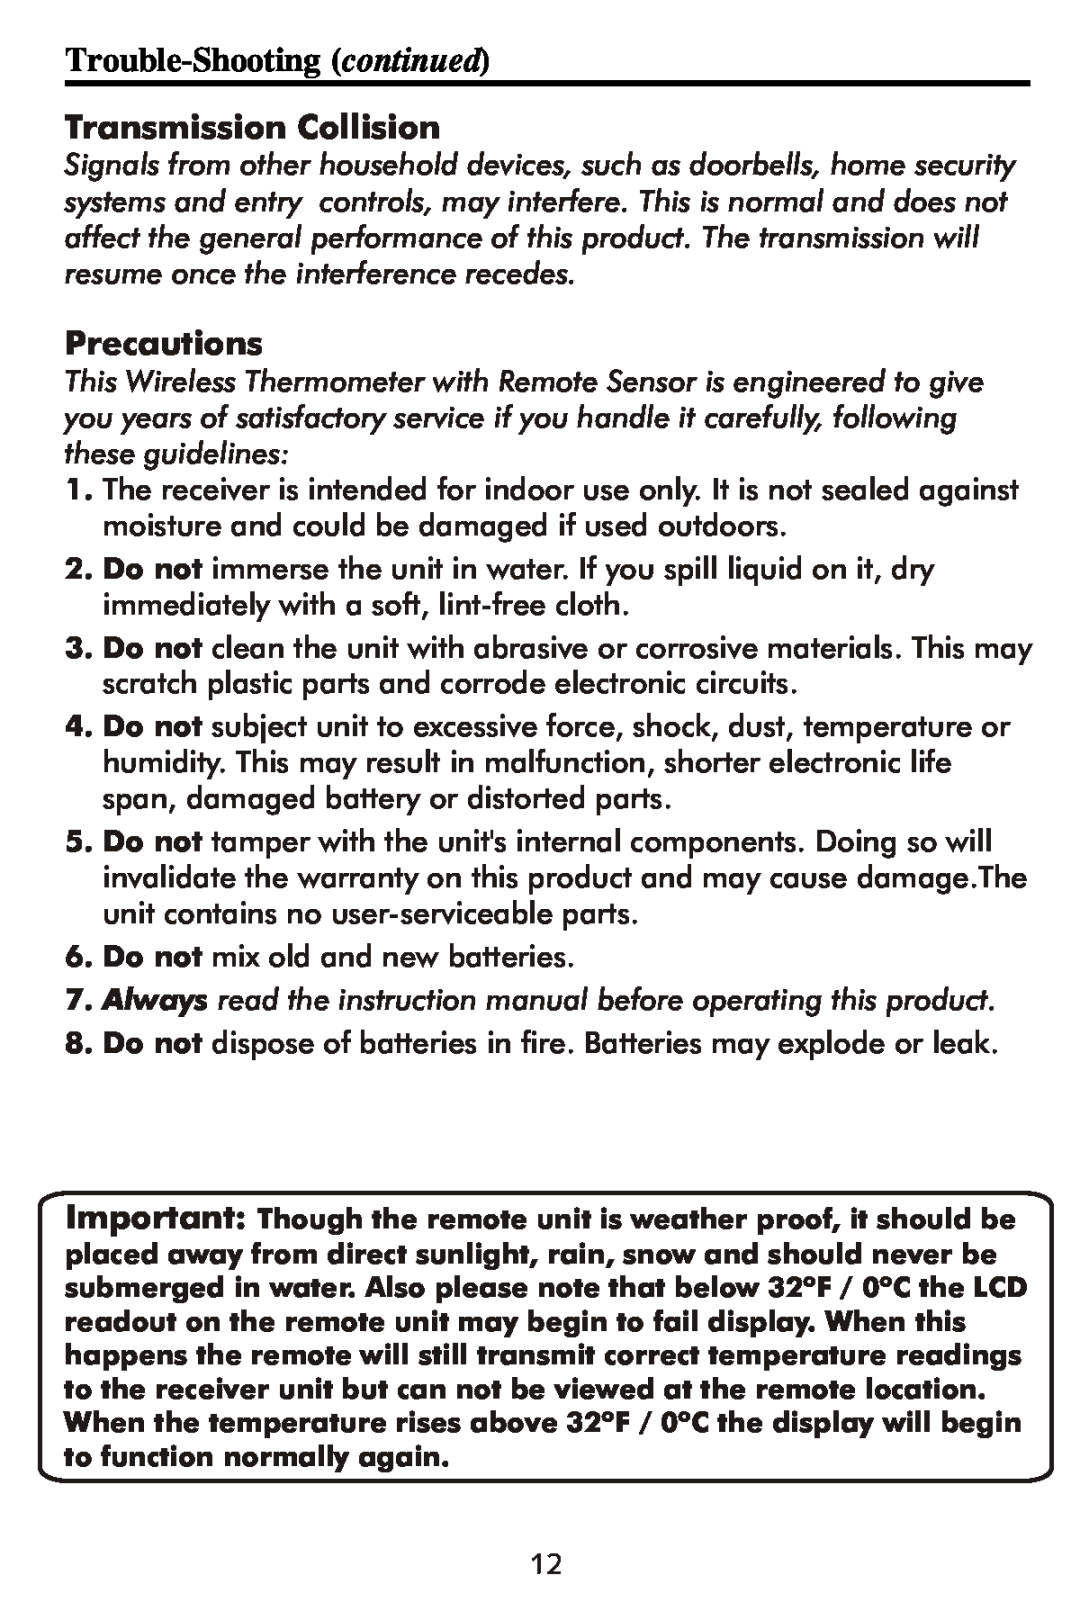 Taylor 1506 instruction manual Trouble-Shootingcontinued, Transmission Collision, Precautions 